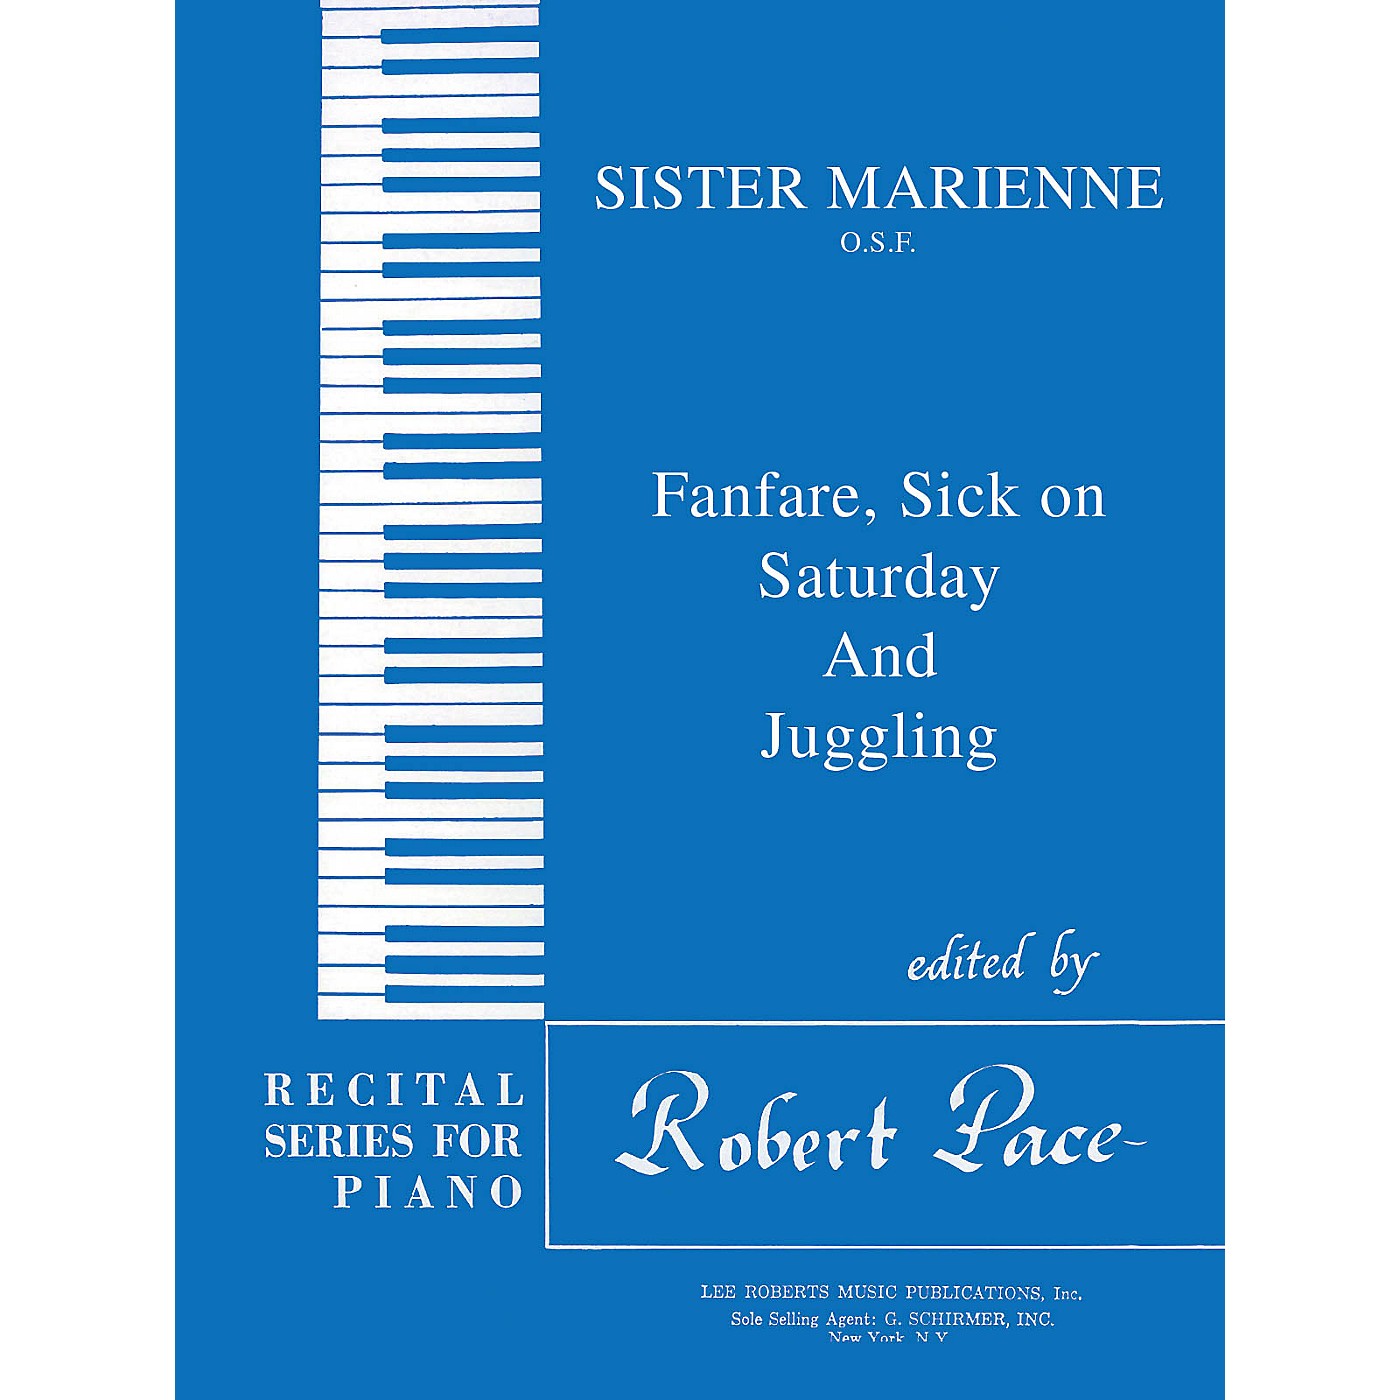 Lee Roberts Fanfare, Sick on Saturday, Juggling Pace Piano Education Series Composed by Sister Marienne thumbnail